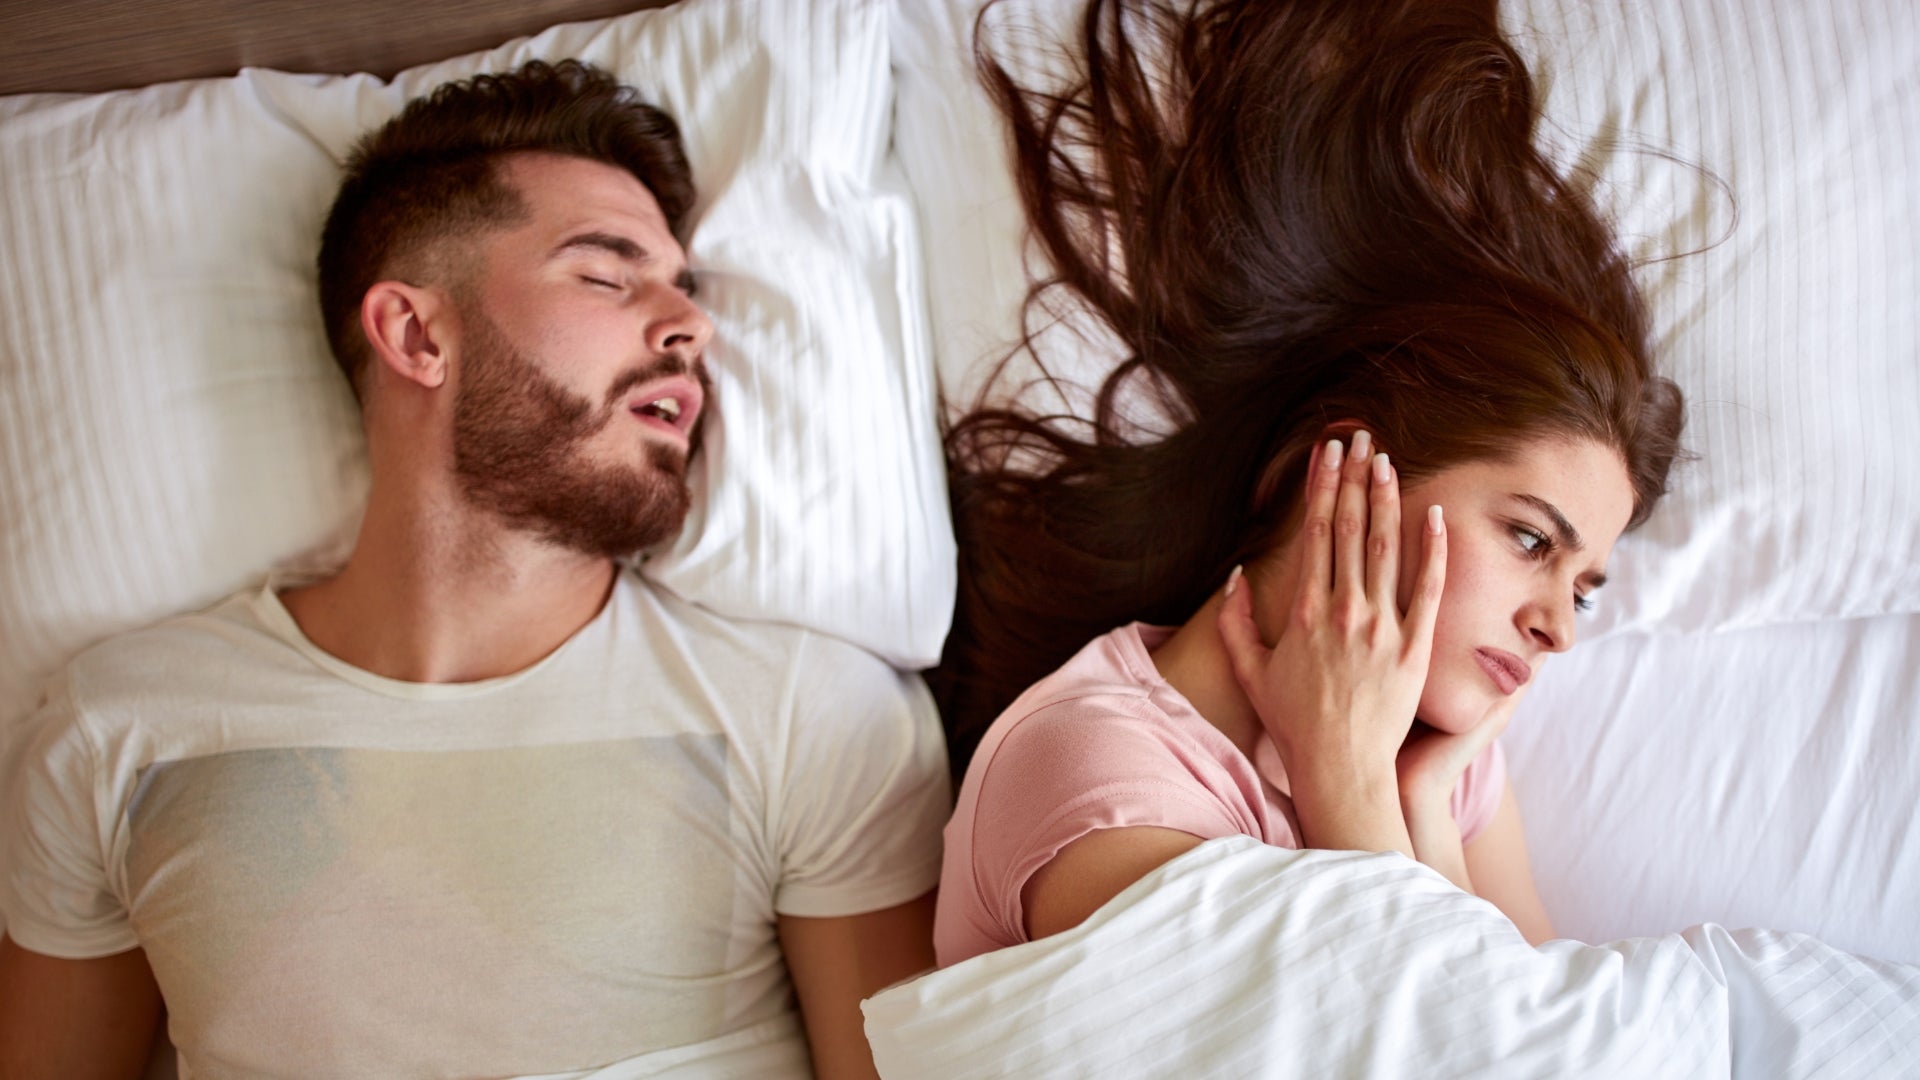 Five Best Anti-Snore Pillows to Help You Get Sounder Sleep